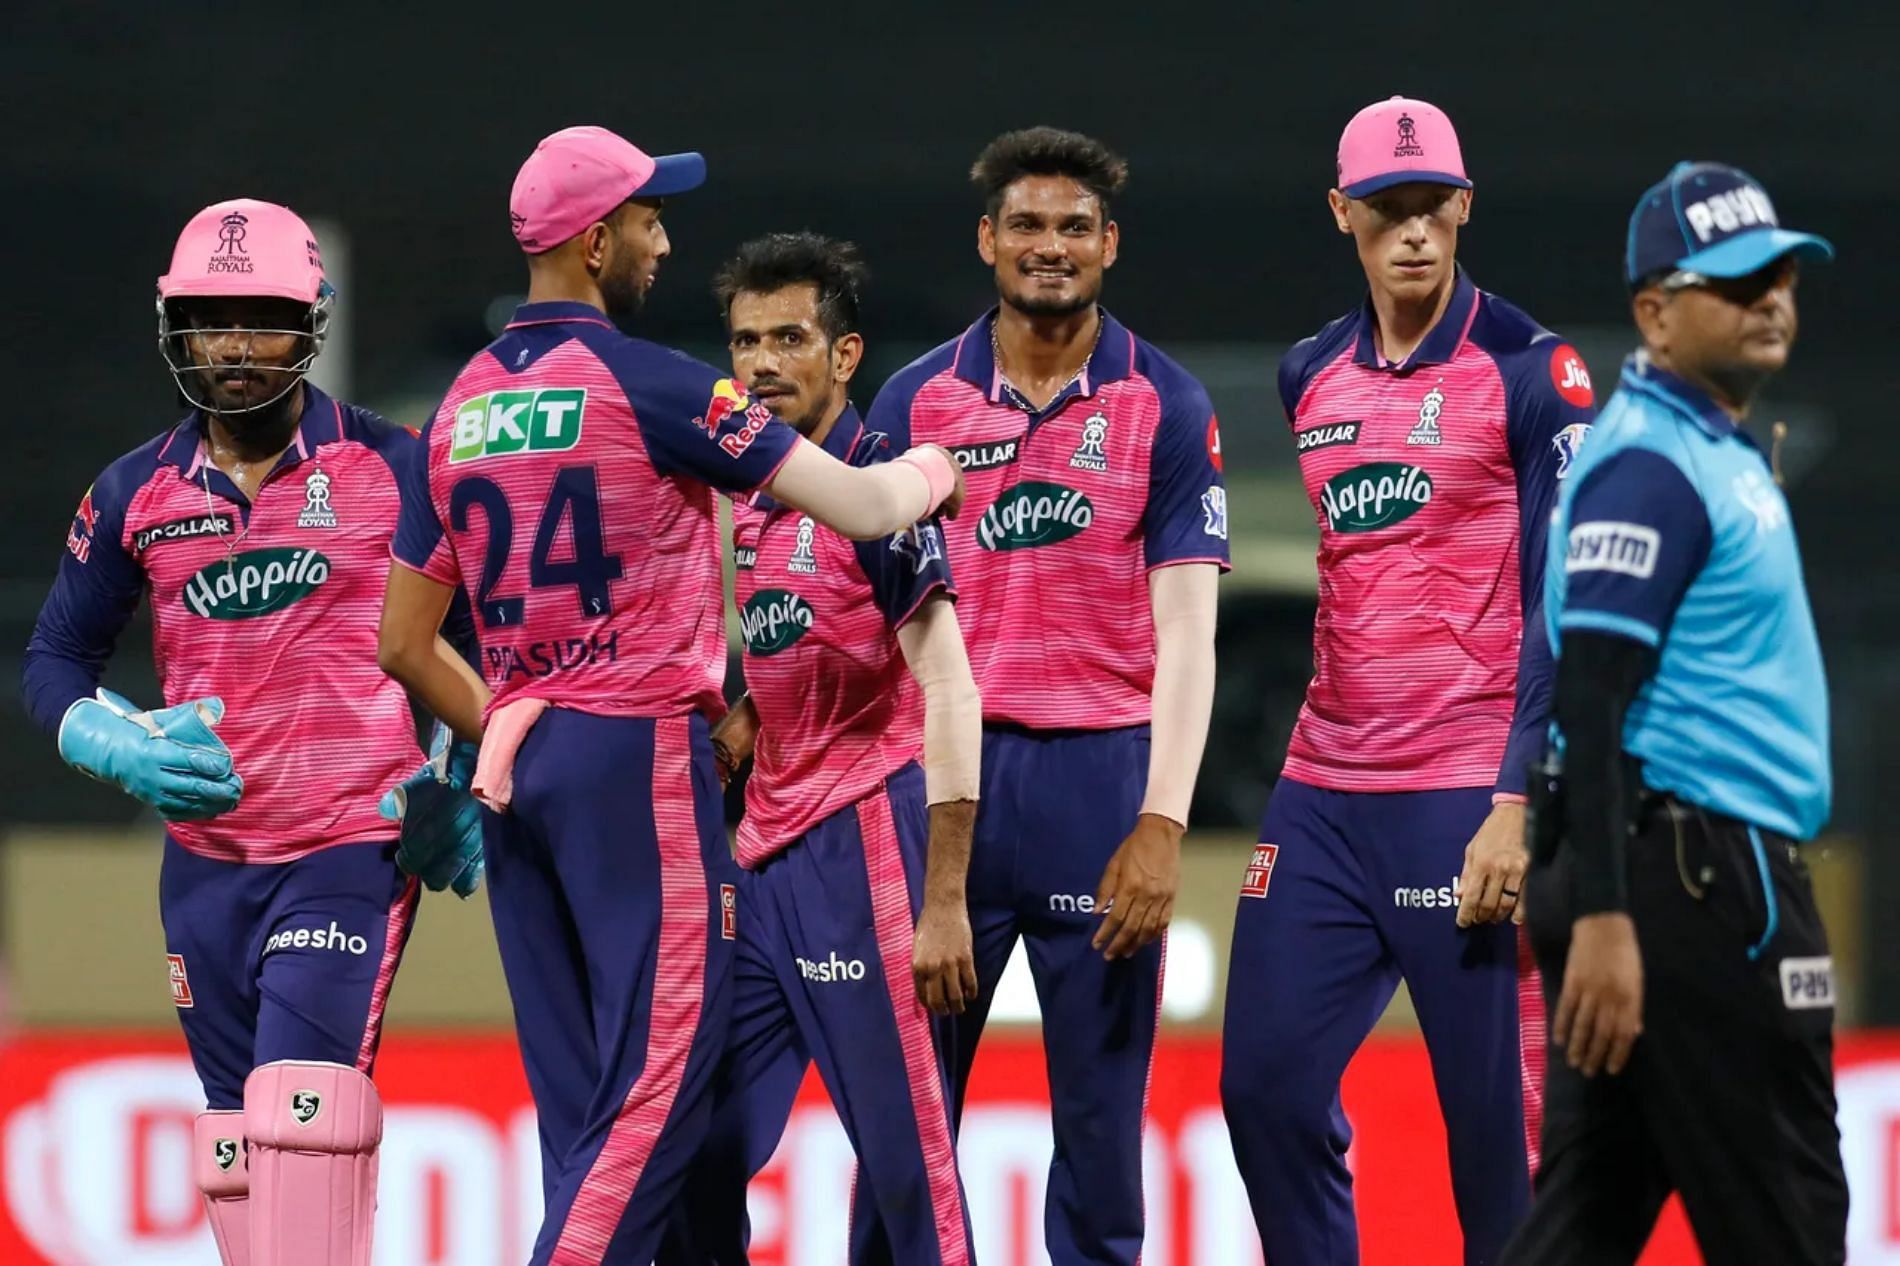 Rajasthan Royals players during the match against LSG. Pic: IPLT20.COM